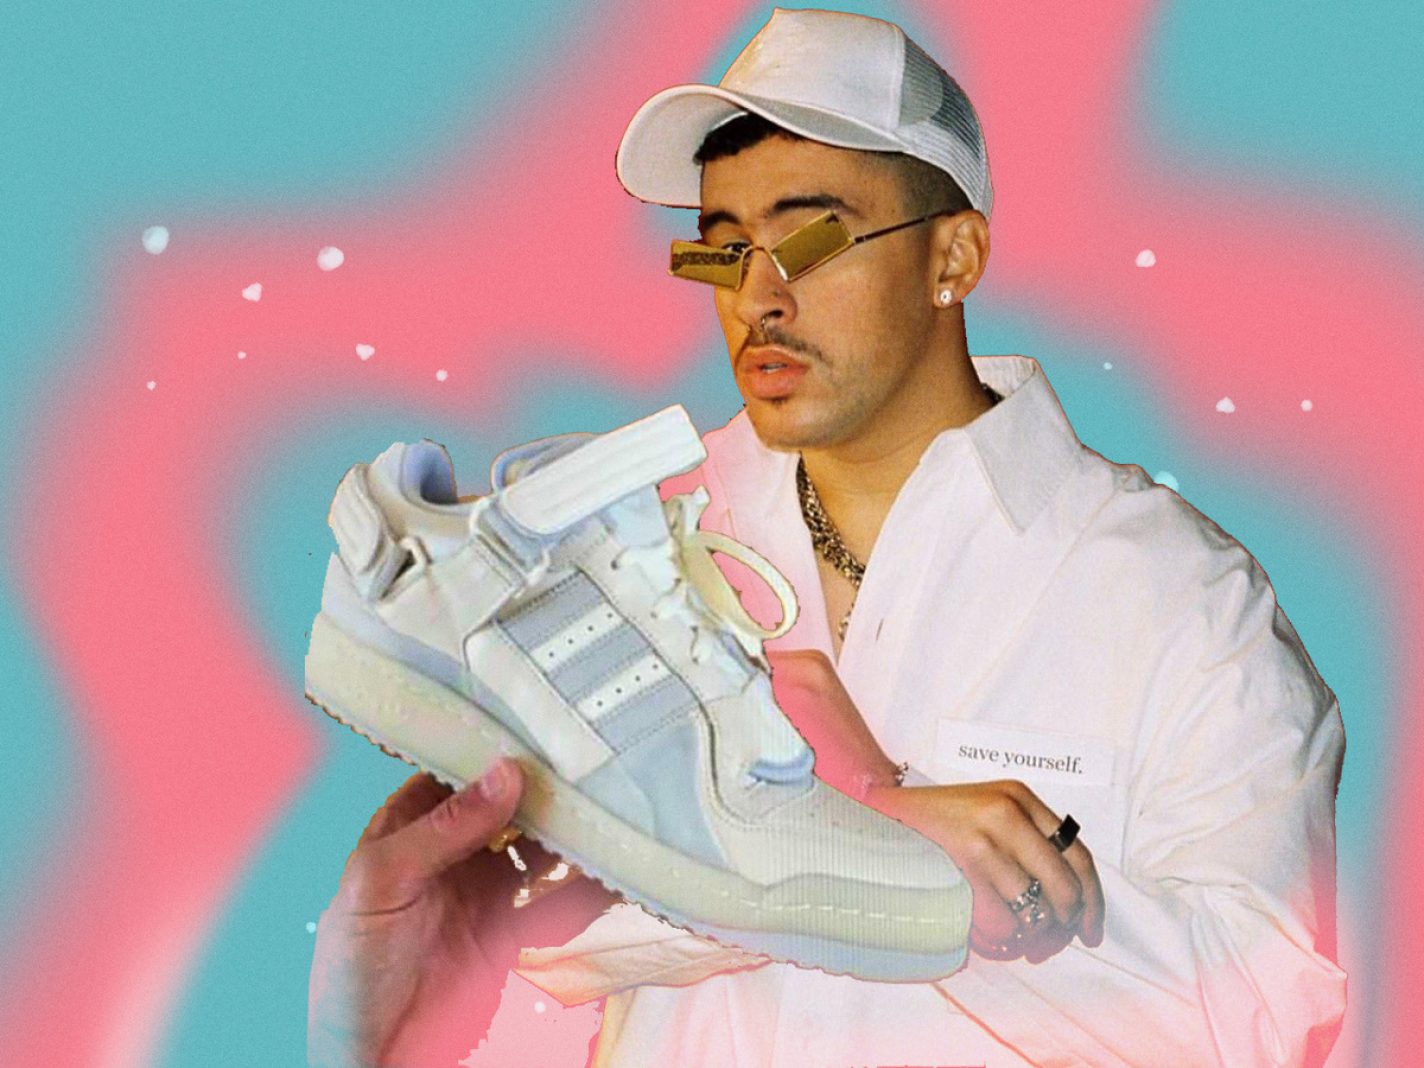 Bad Bunny Is Reportedly Teaming up With Adidas for Sneaker Collab